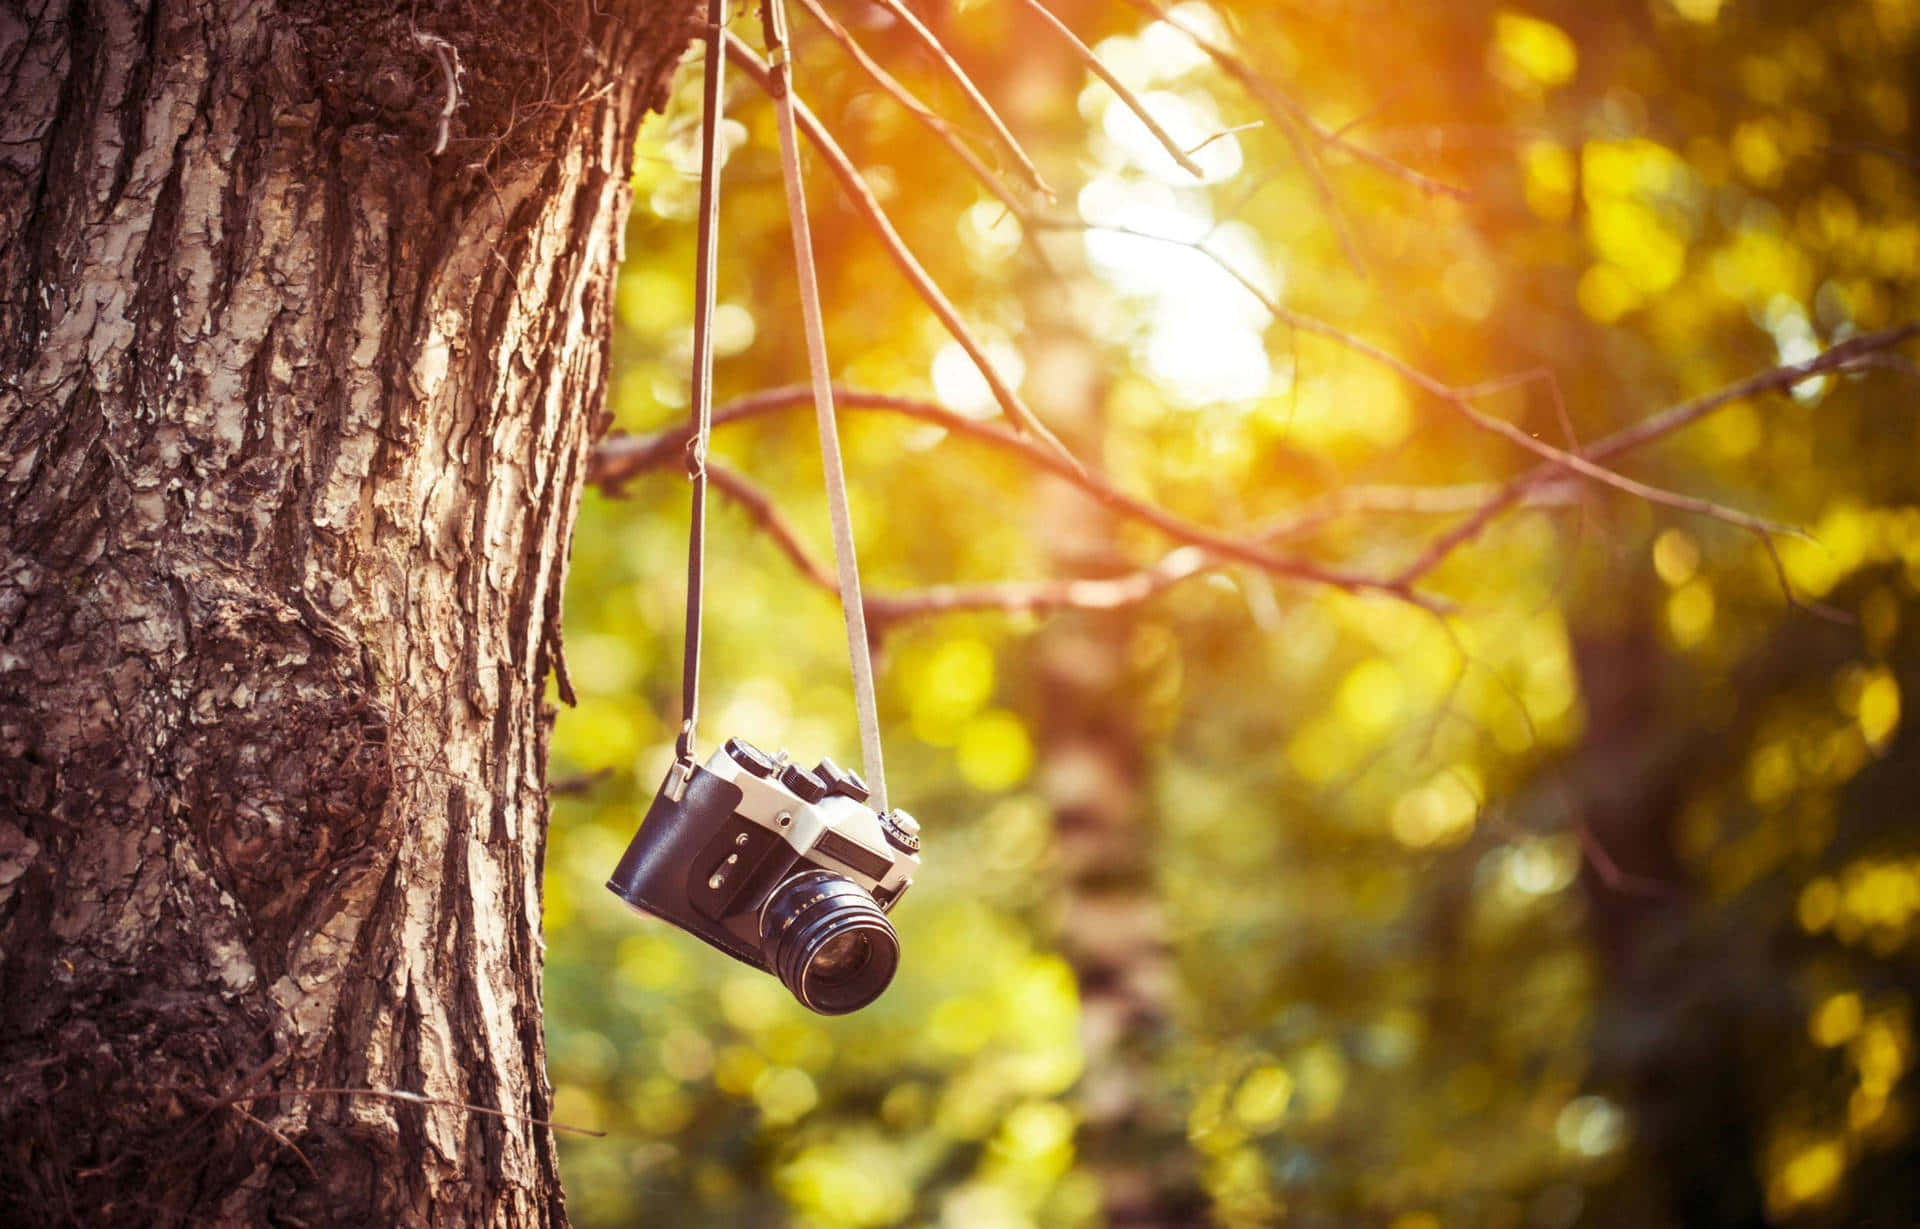 A Camera Hanging From A Tree In The Forest